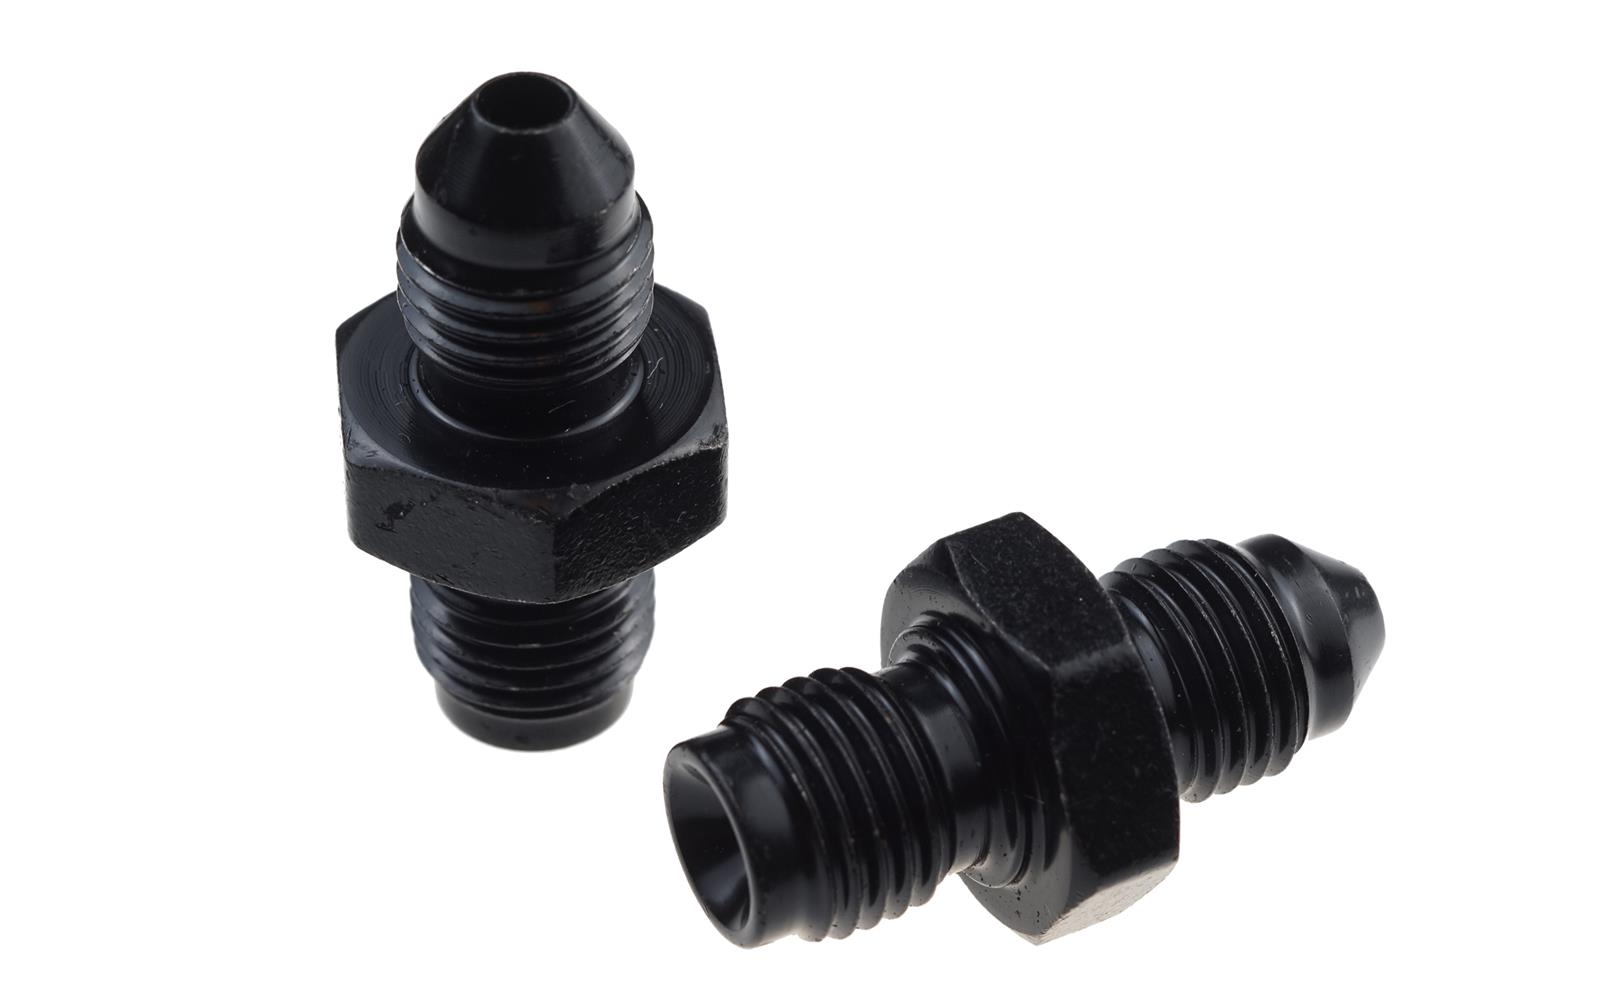 Redhorse Performance 336-03-10-2 -03 to 10mmx1.25 Male inverted flare -black -2pcs/pkg